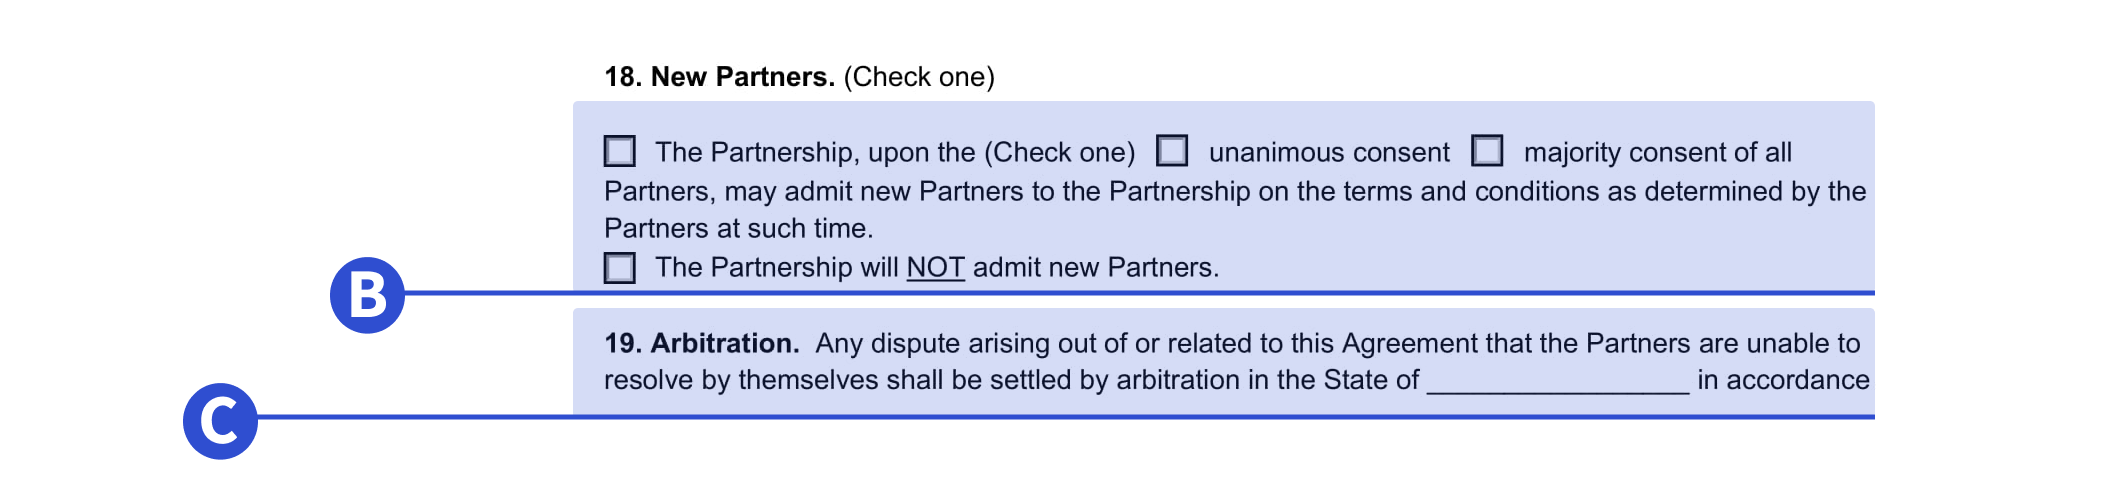 Where to include new partner information in our template.